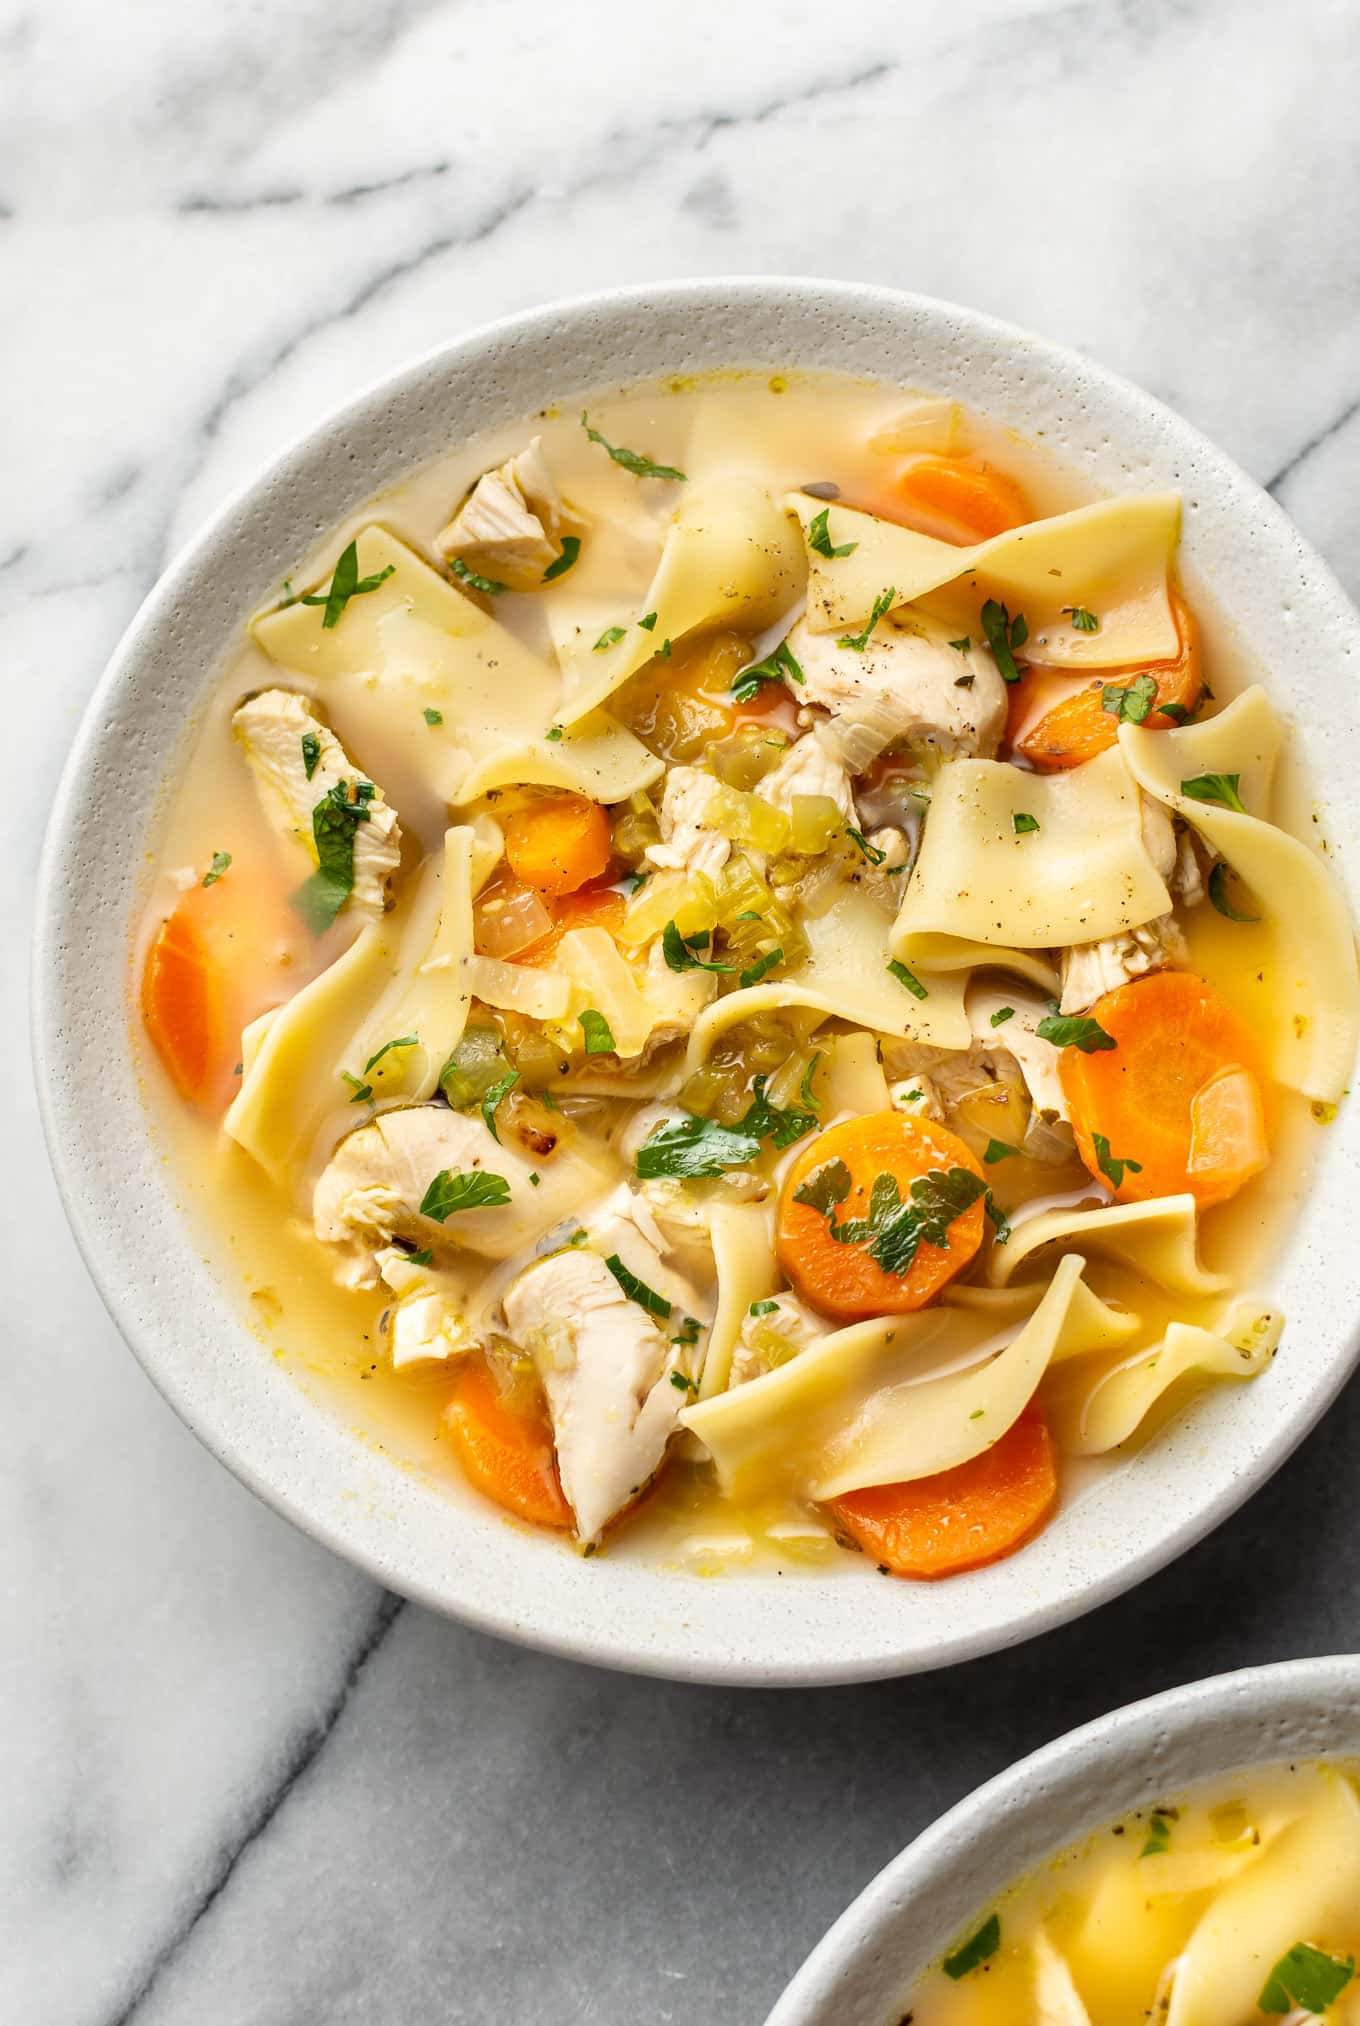 Easy Homemade Chicken Noodle Soup (One Pot)